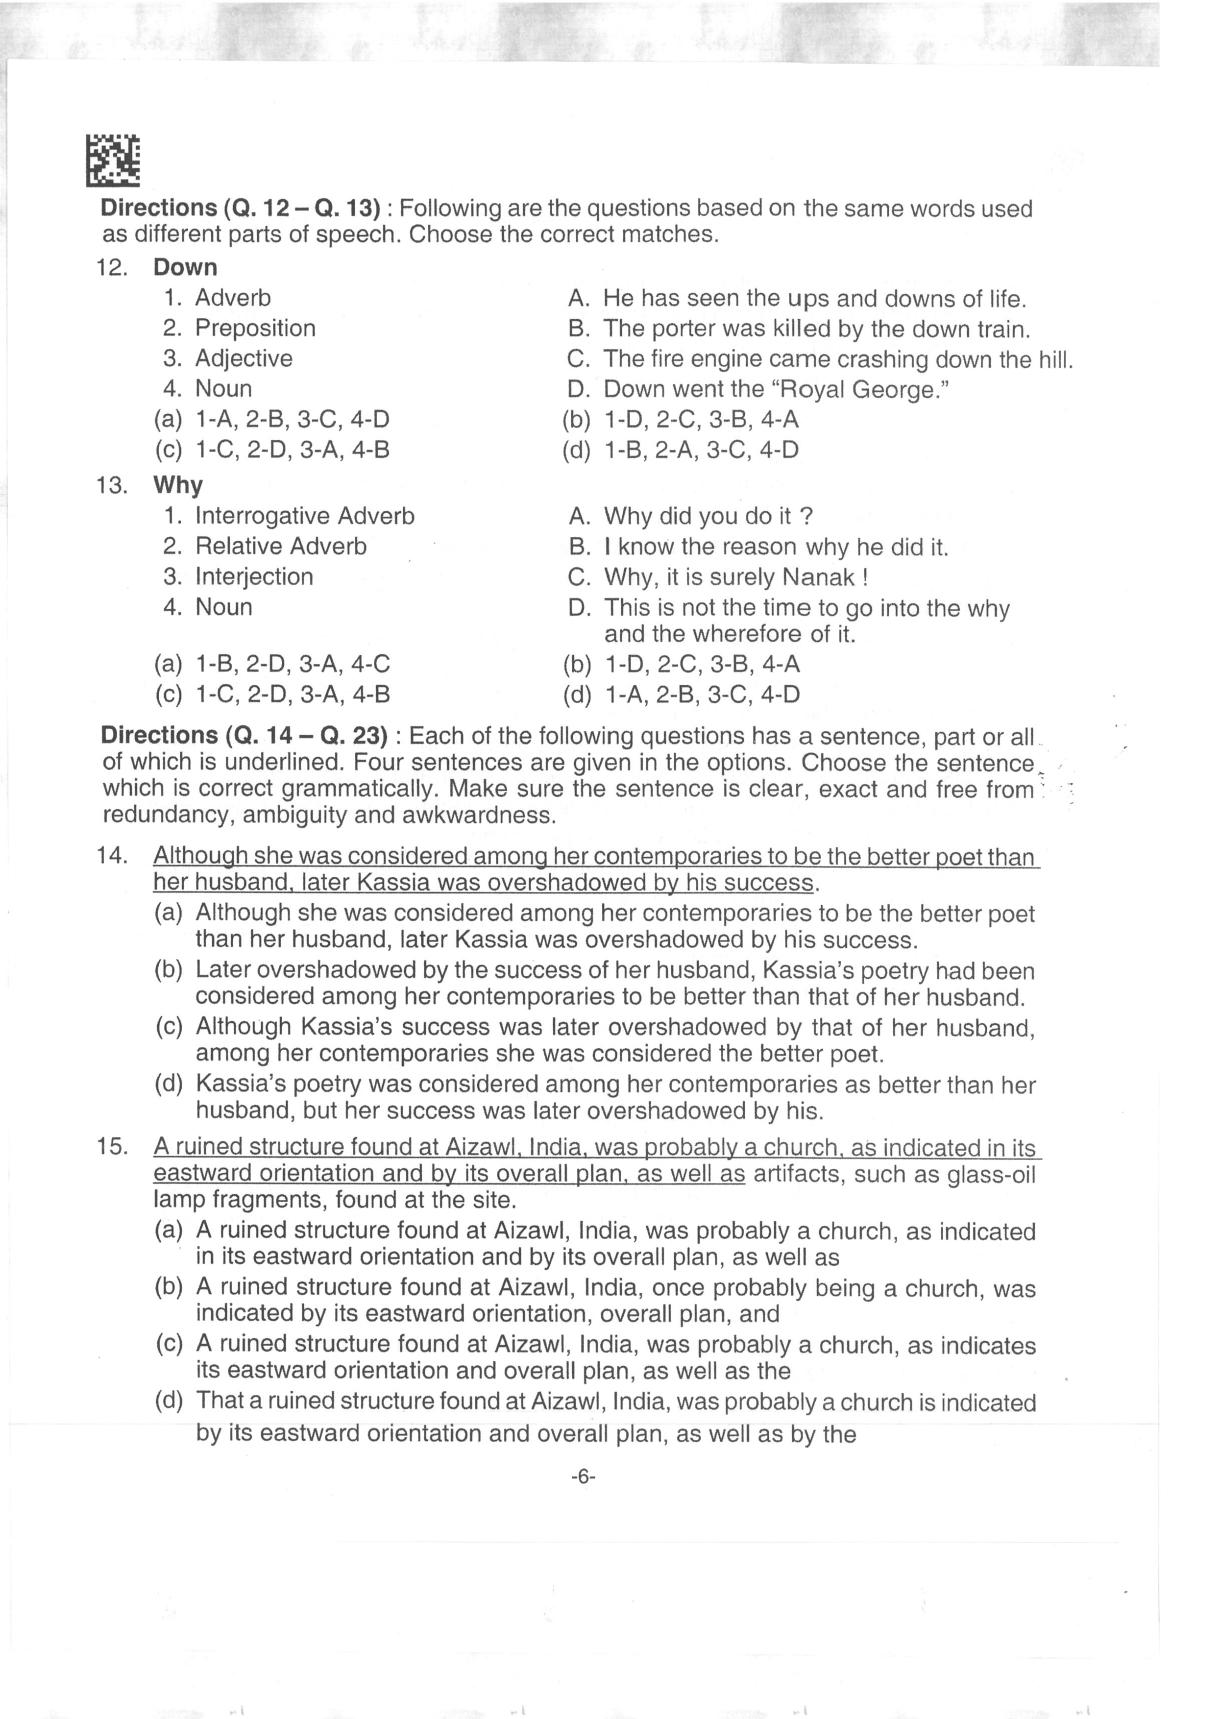 AILET 2019 Question Paper for BA LLB - Page 6